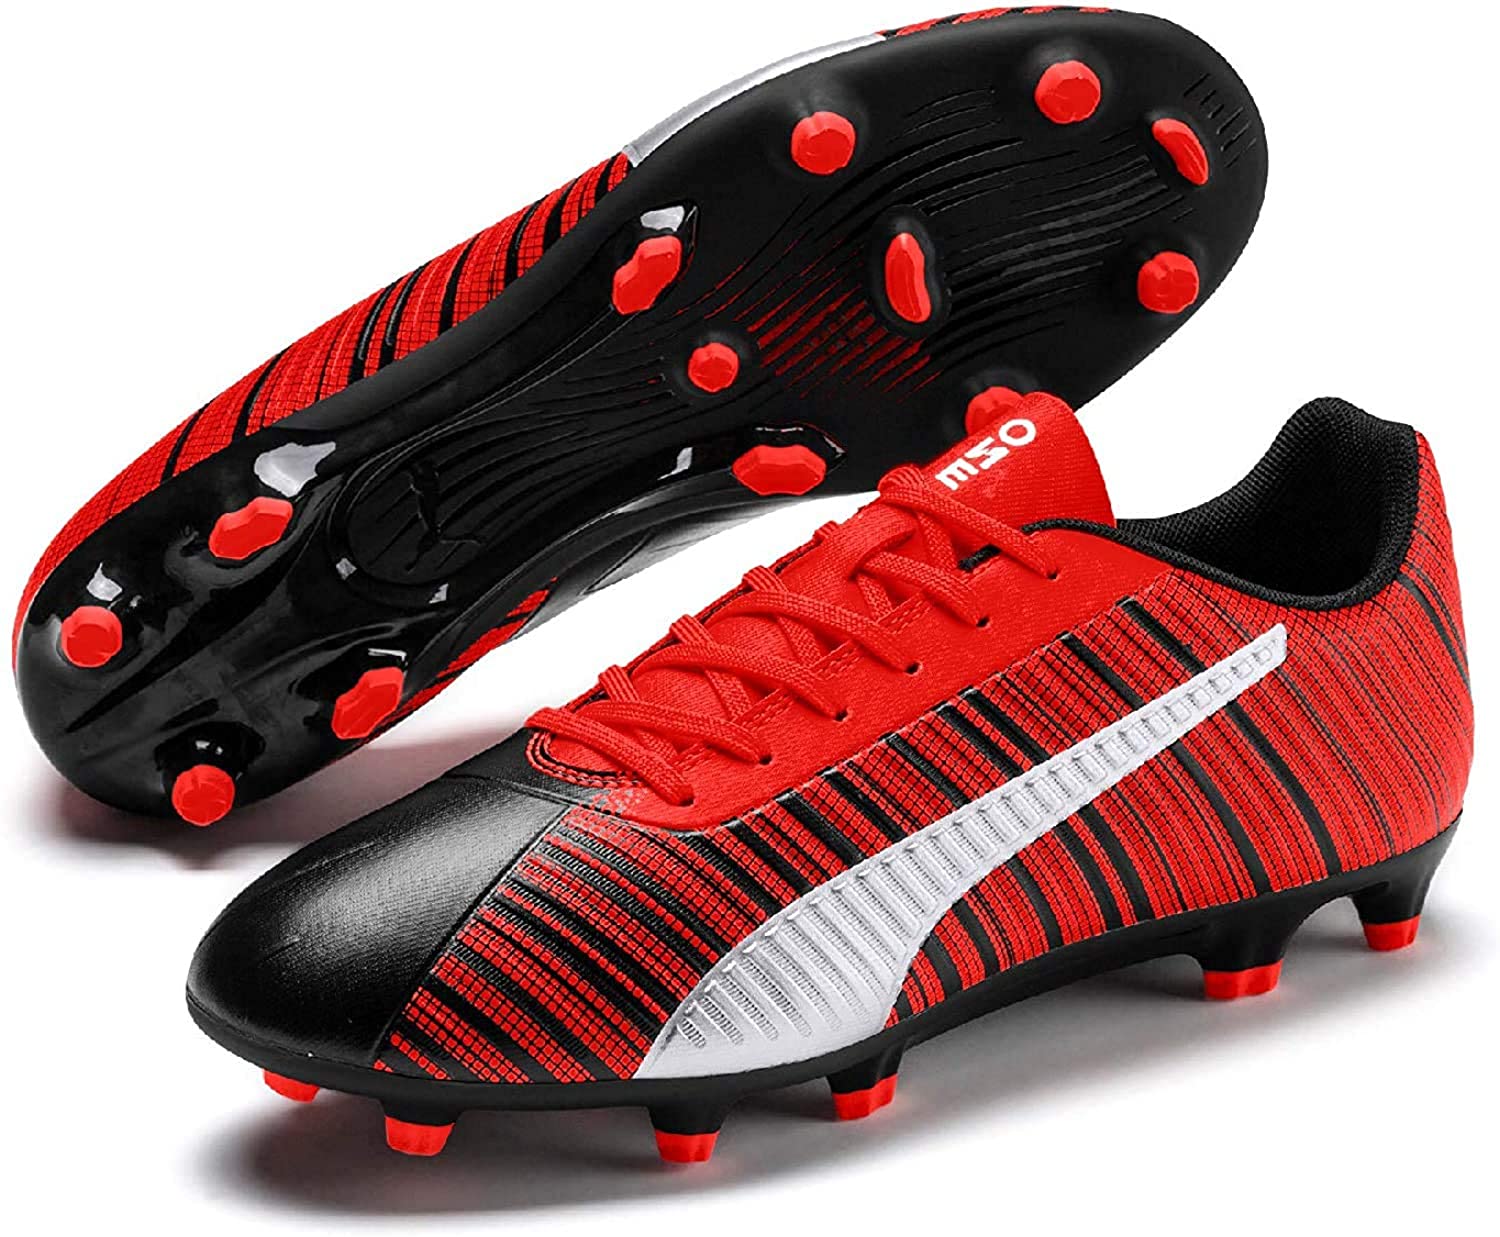 Top 6 Best Football Shoes Under ₹4000 